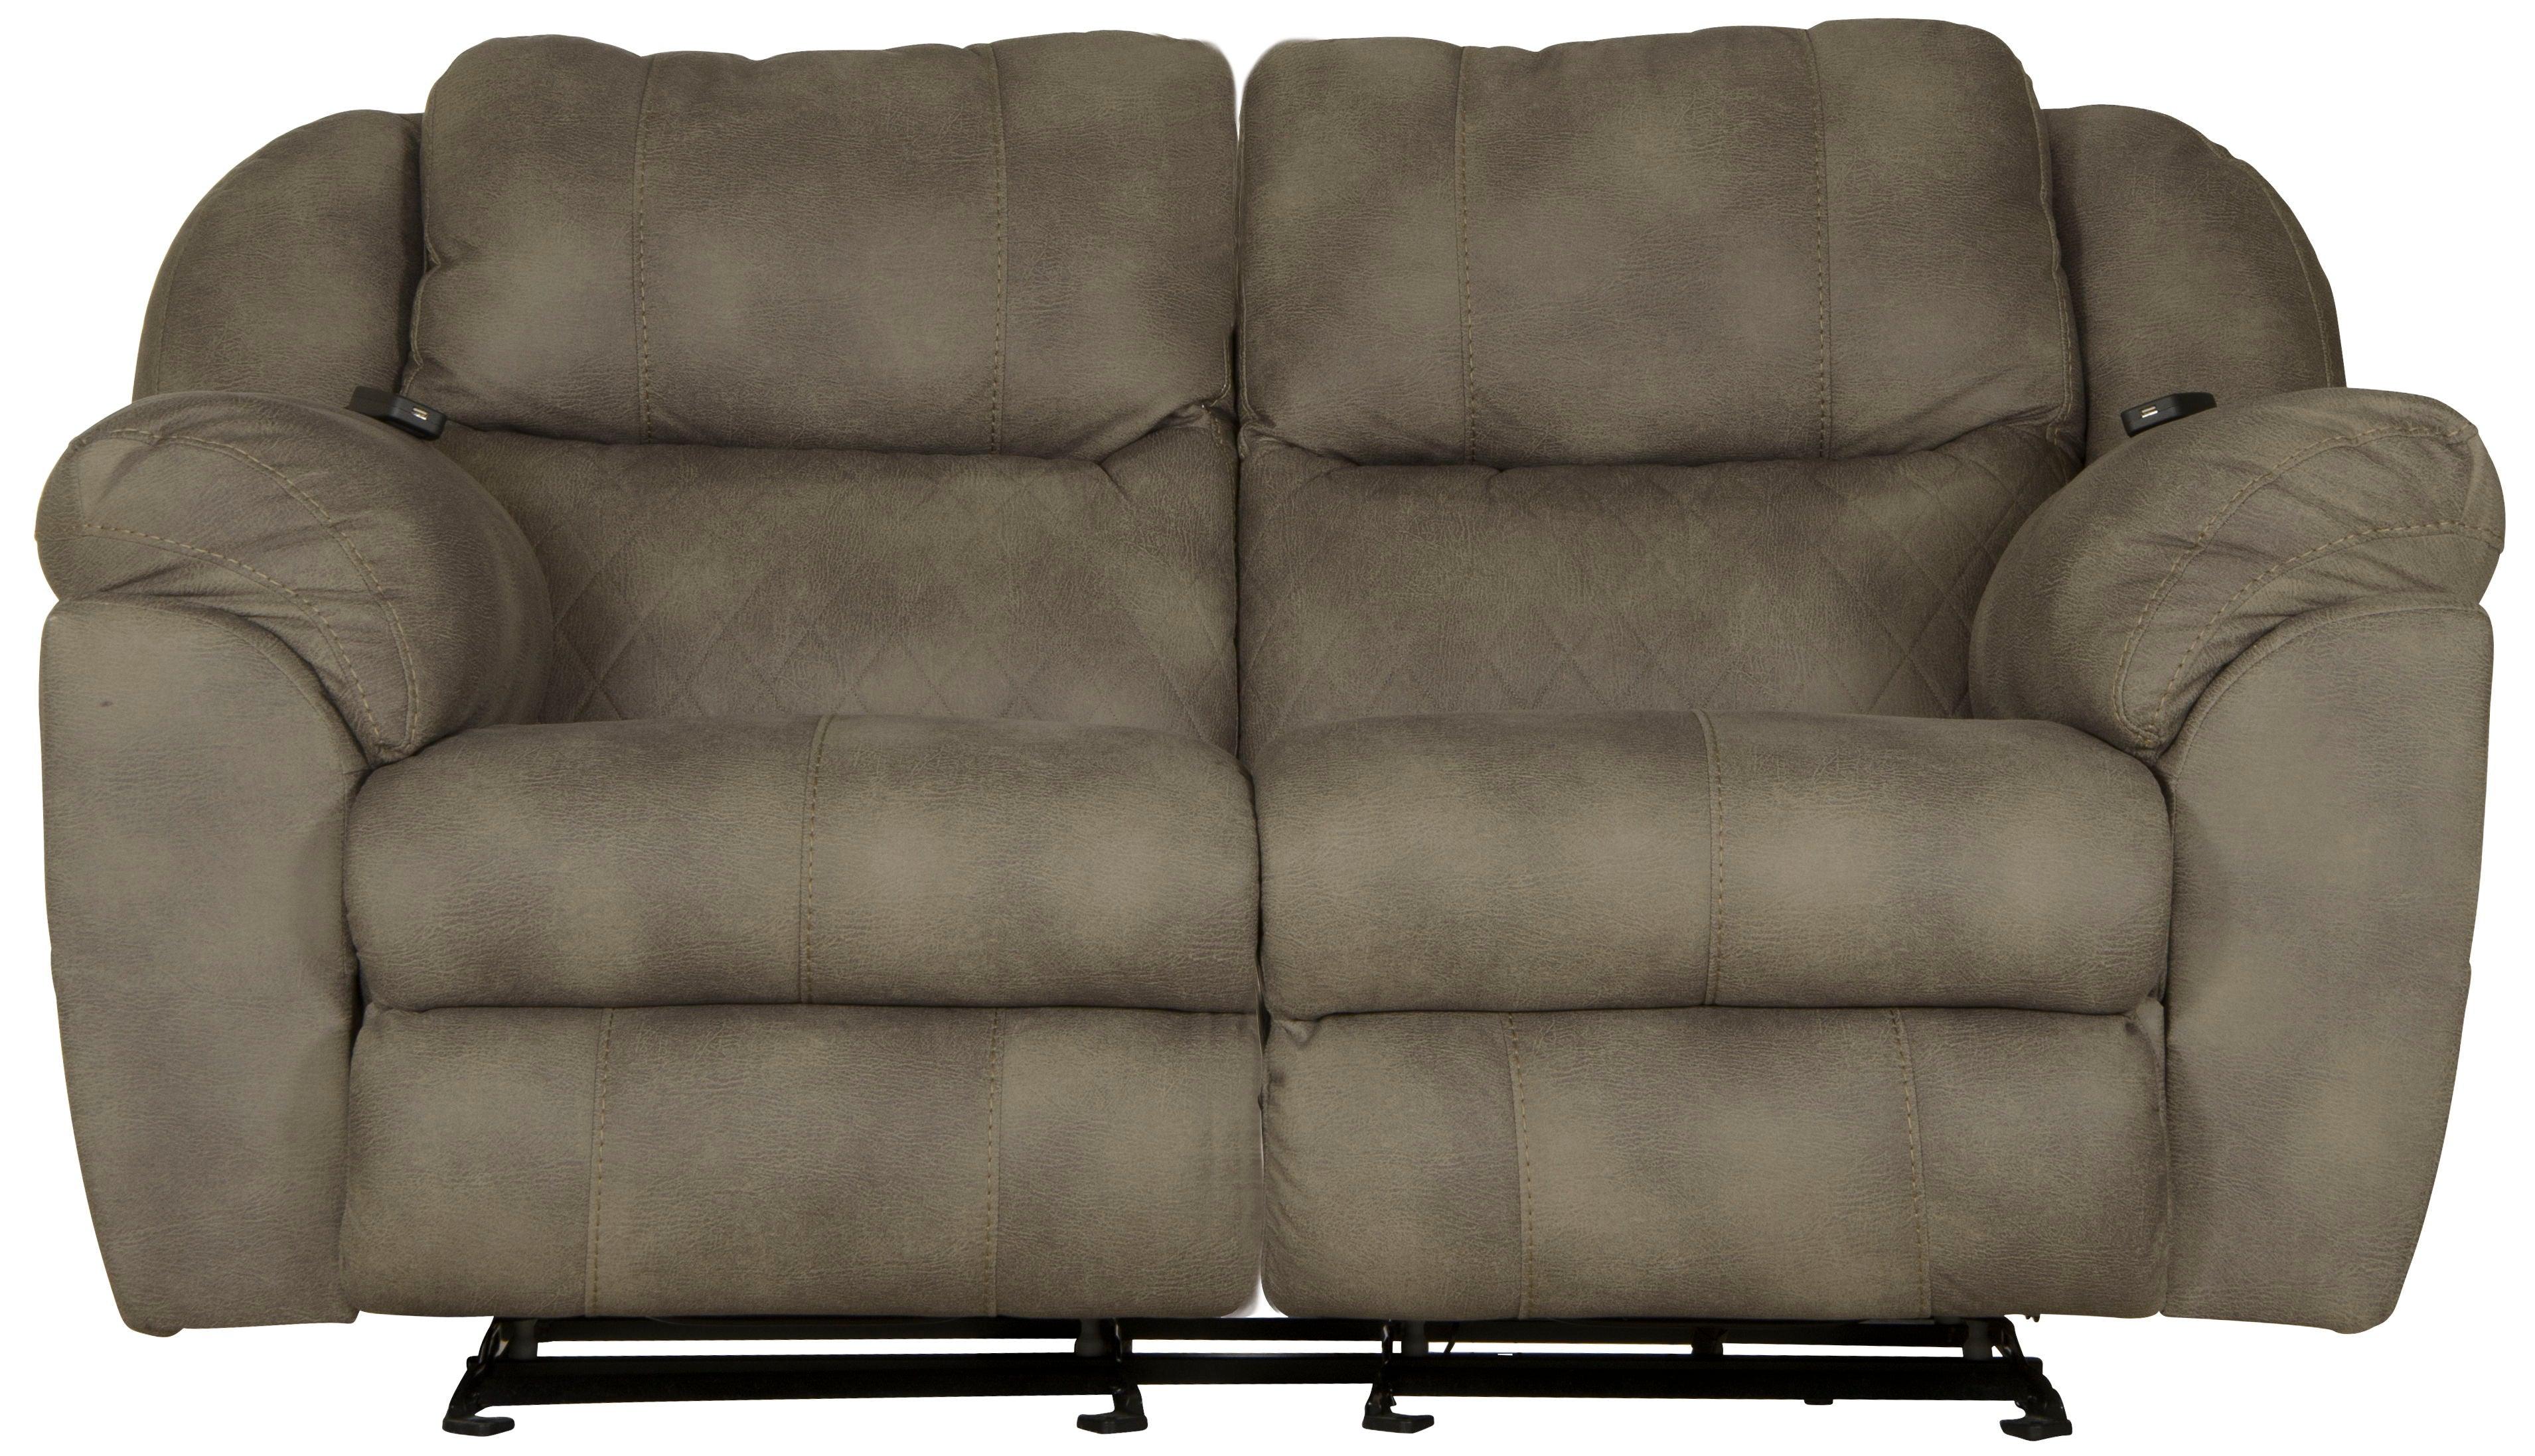 Catnapper - Flynn - Power Lay Flat Rocking Loveseat with Power Adjustable Headrest & Lumbar and Dual Heat & Massage - Fig - 5th Avenue Furniture